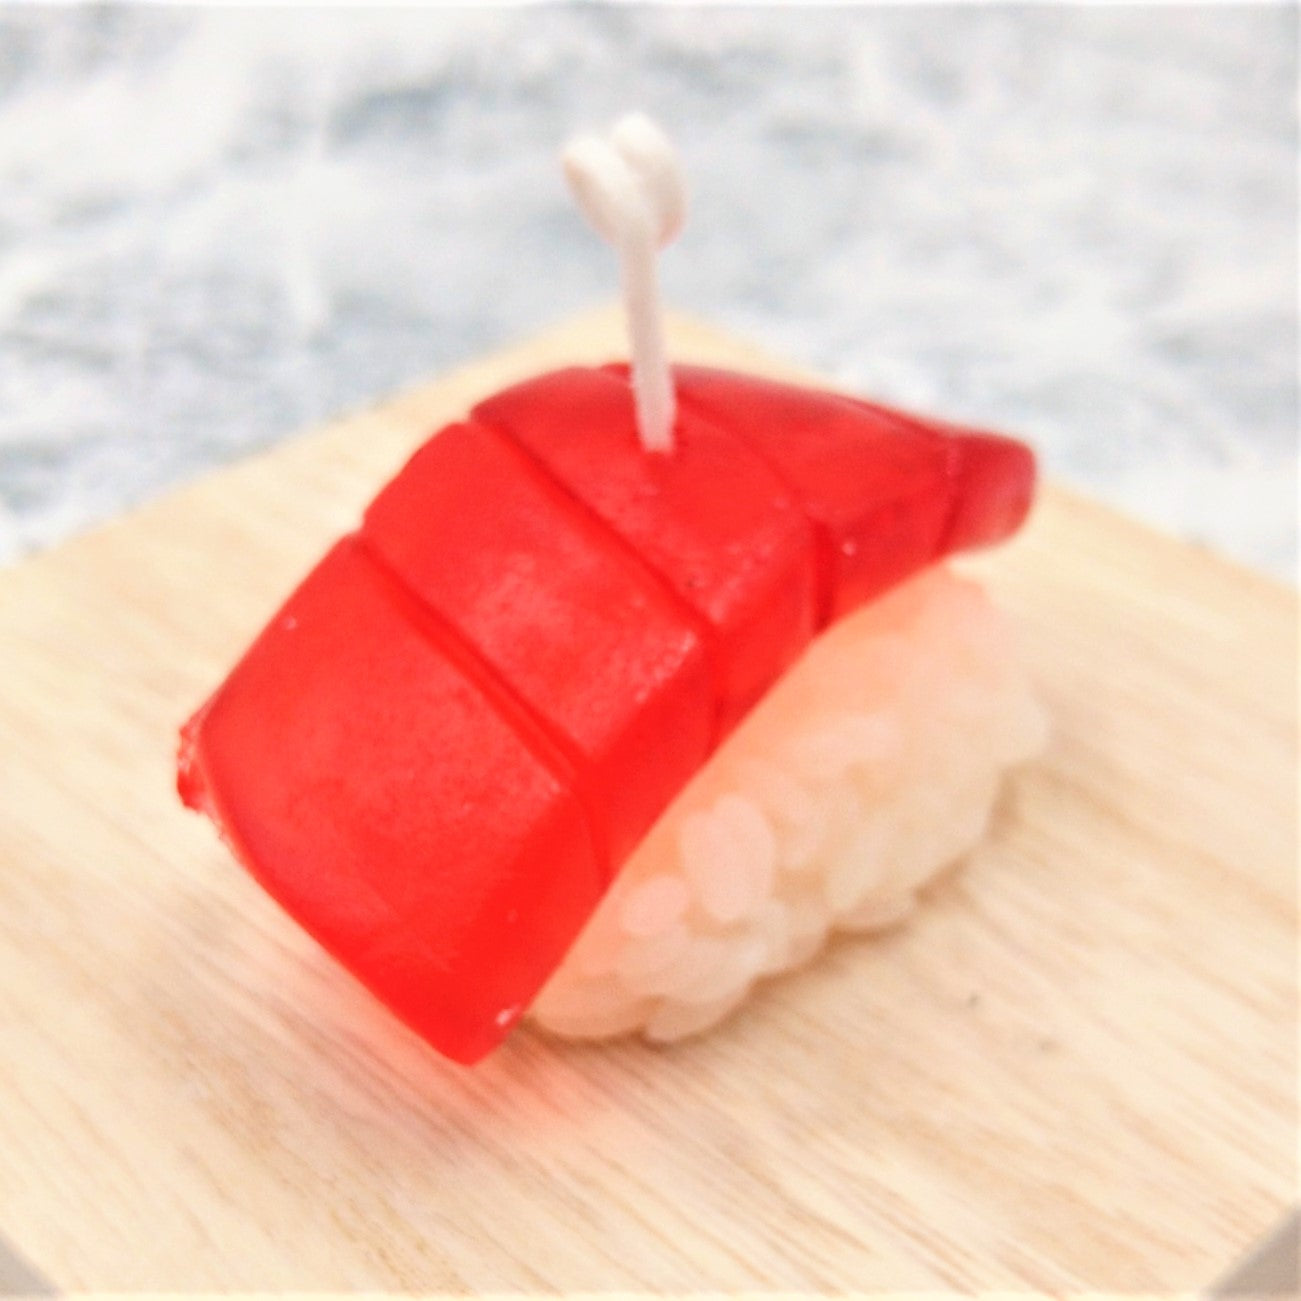 Special Sushi Set ~ Handmade Food Candle